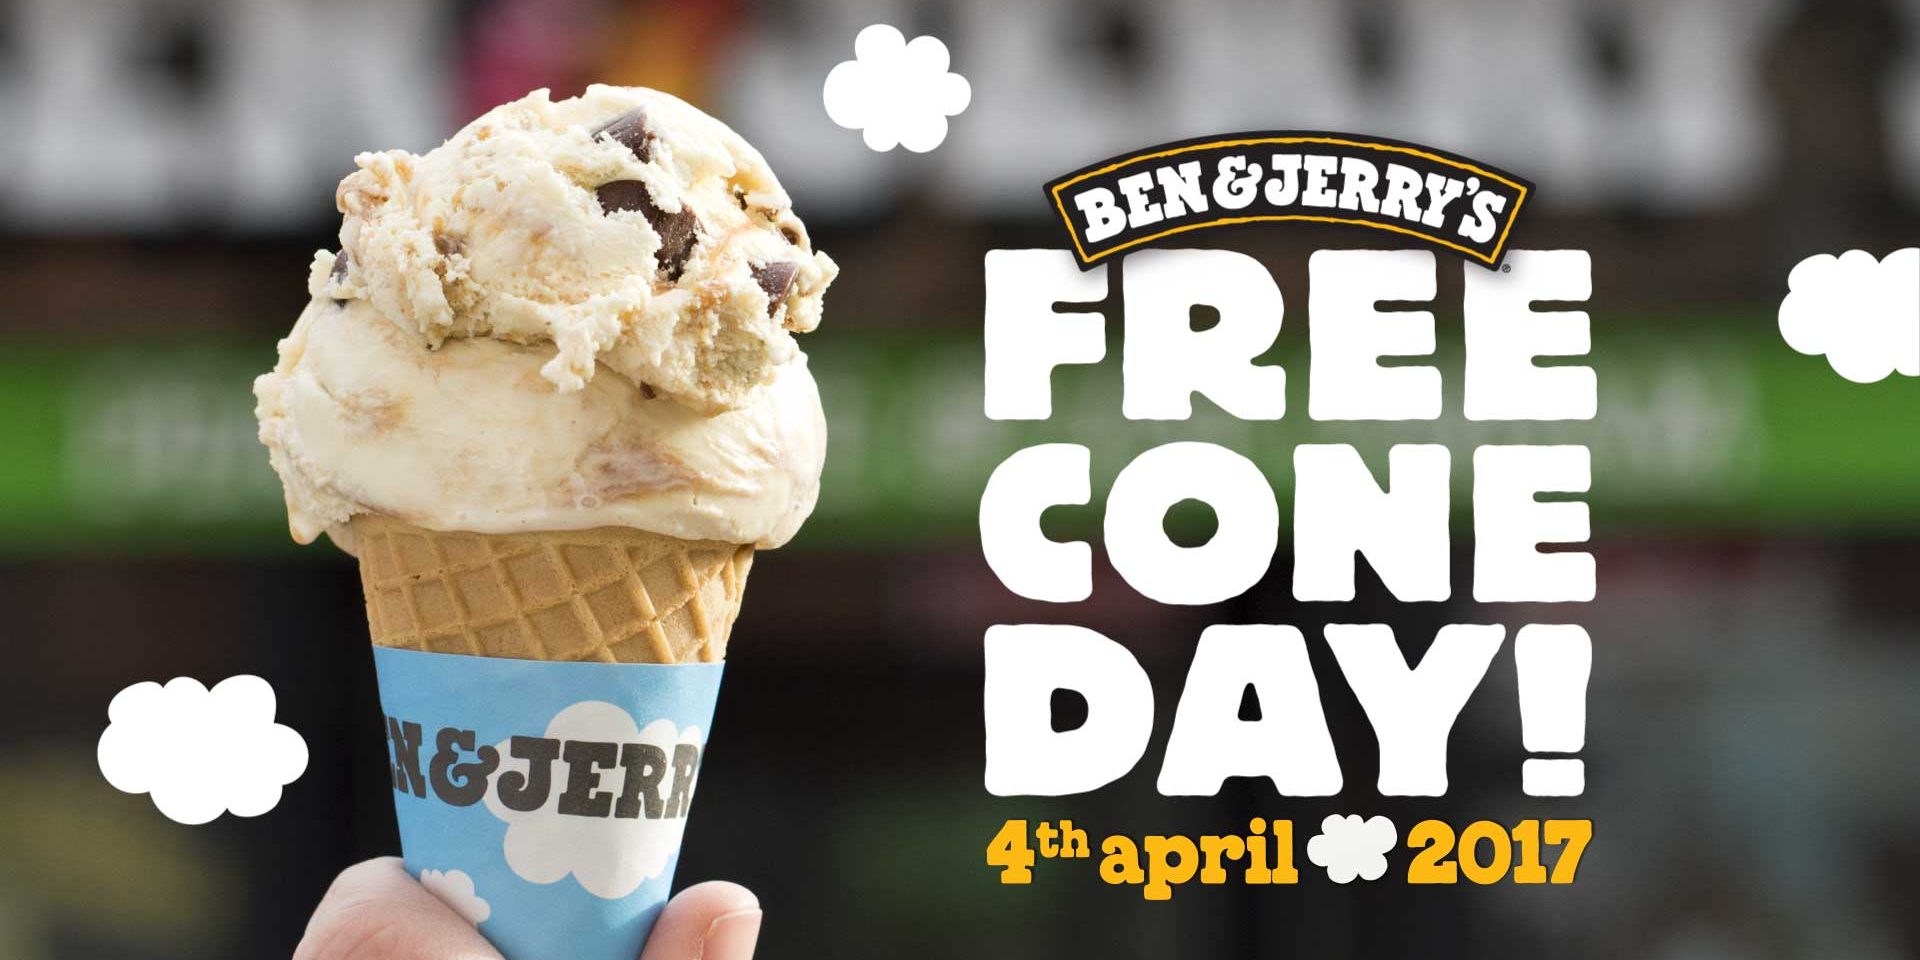 Ben & Jerry’s Singapore FREE Cone Day Promotion Returns on 4 Apr 2017